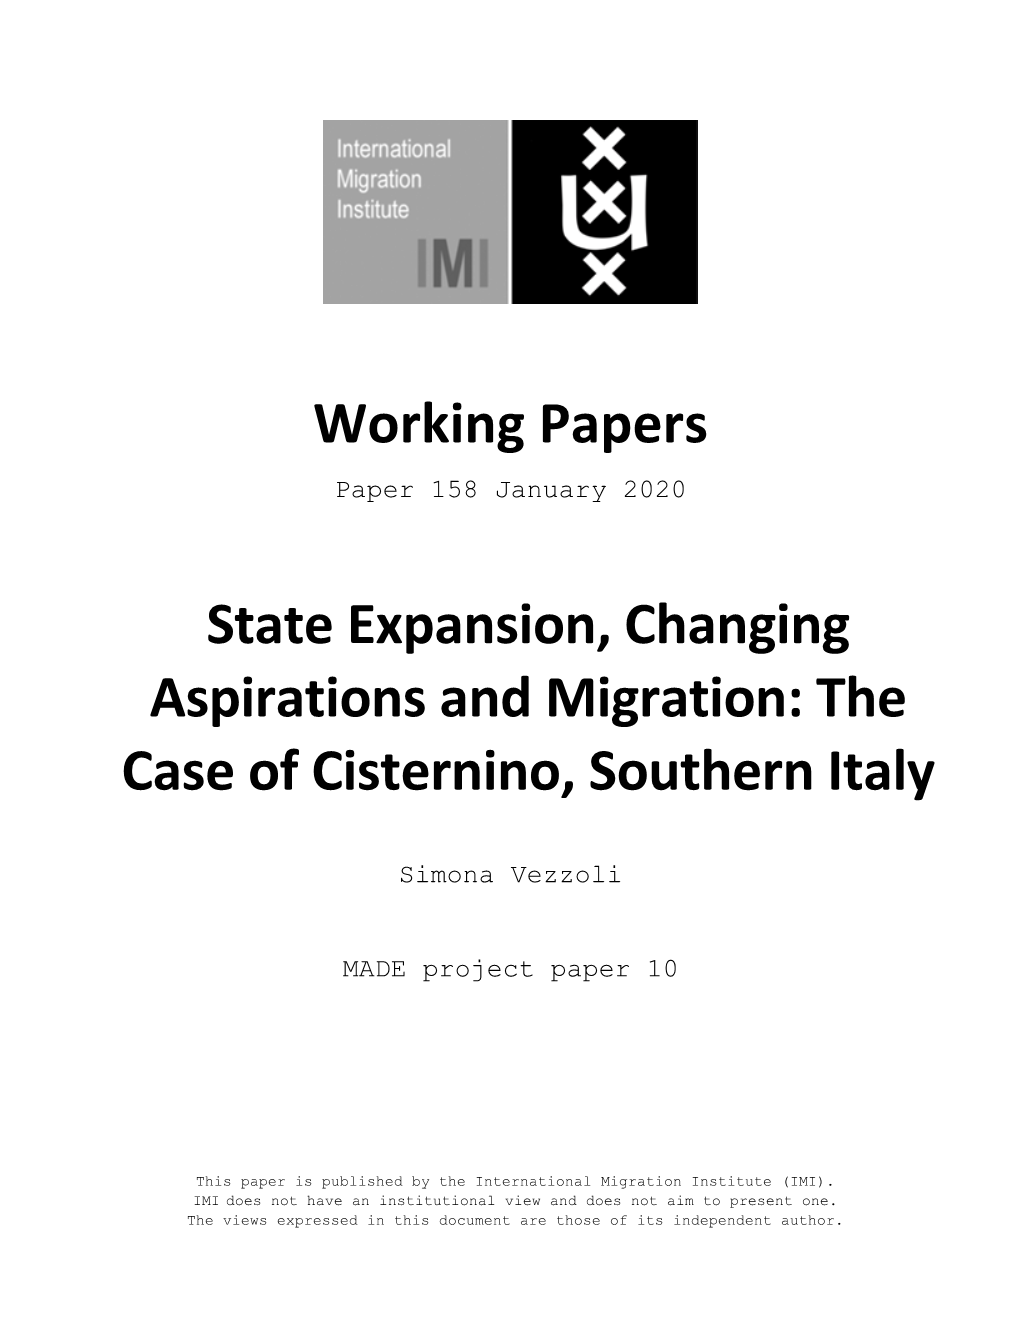 Working Papers State Expansion, Changing Aspirations and Migration: the Case of Cisternino, Southern Italy